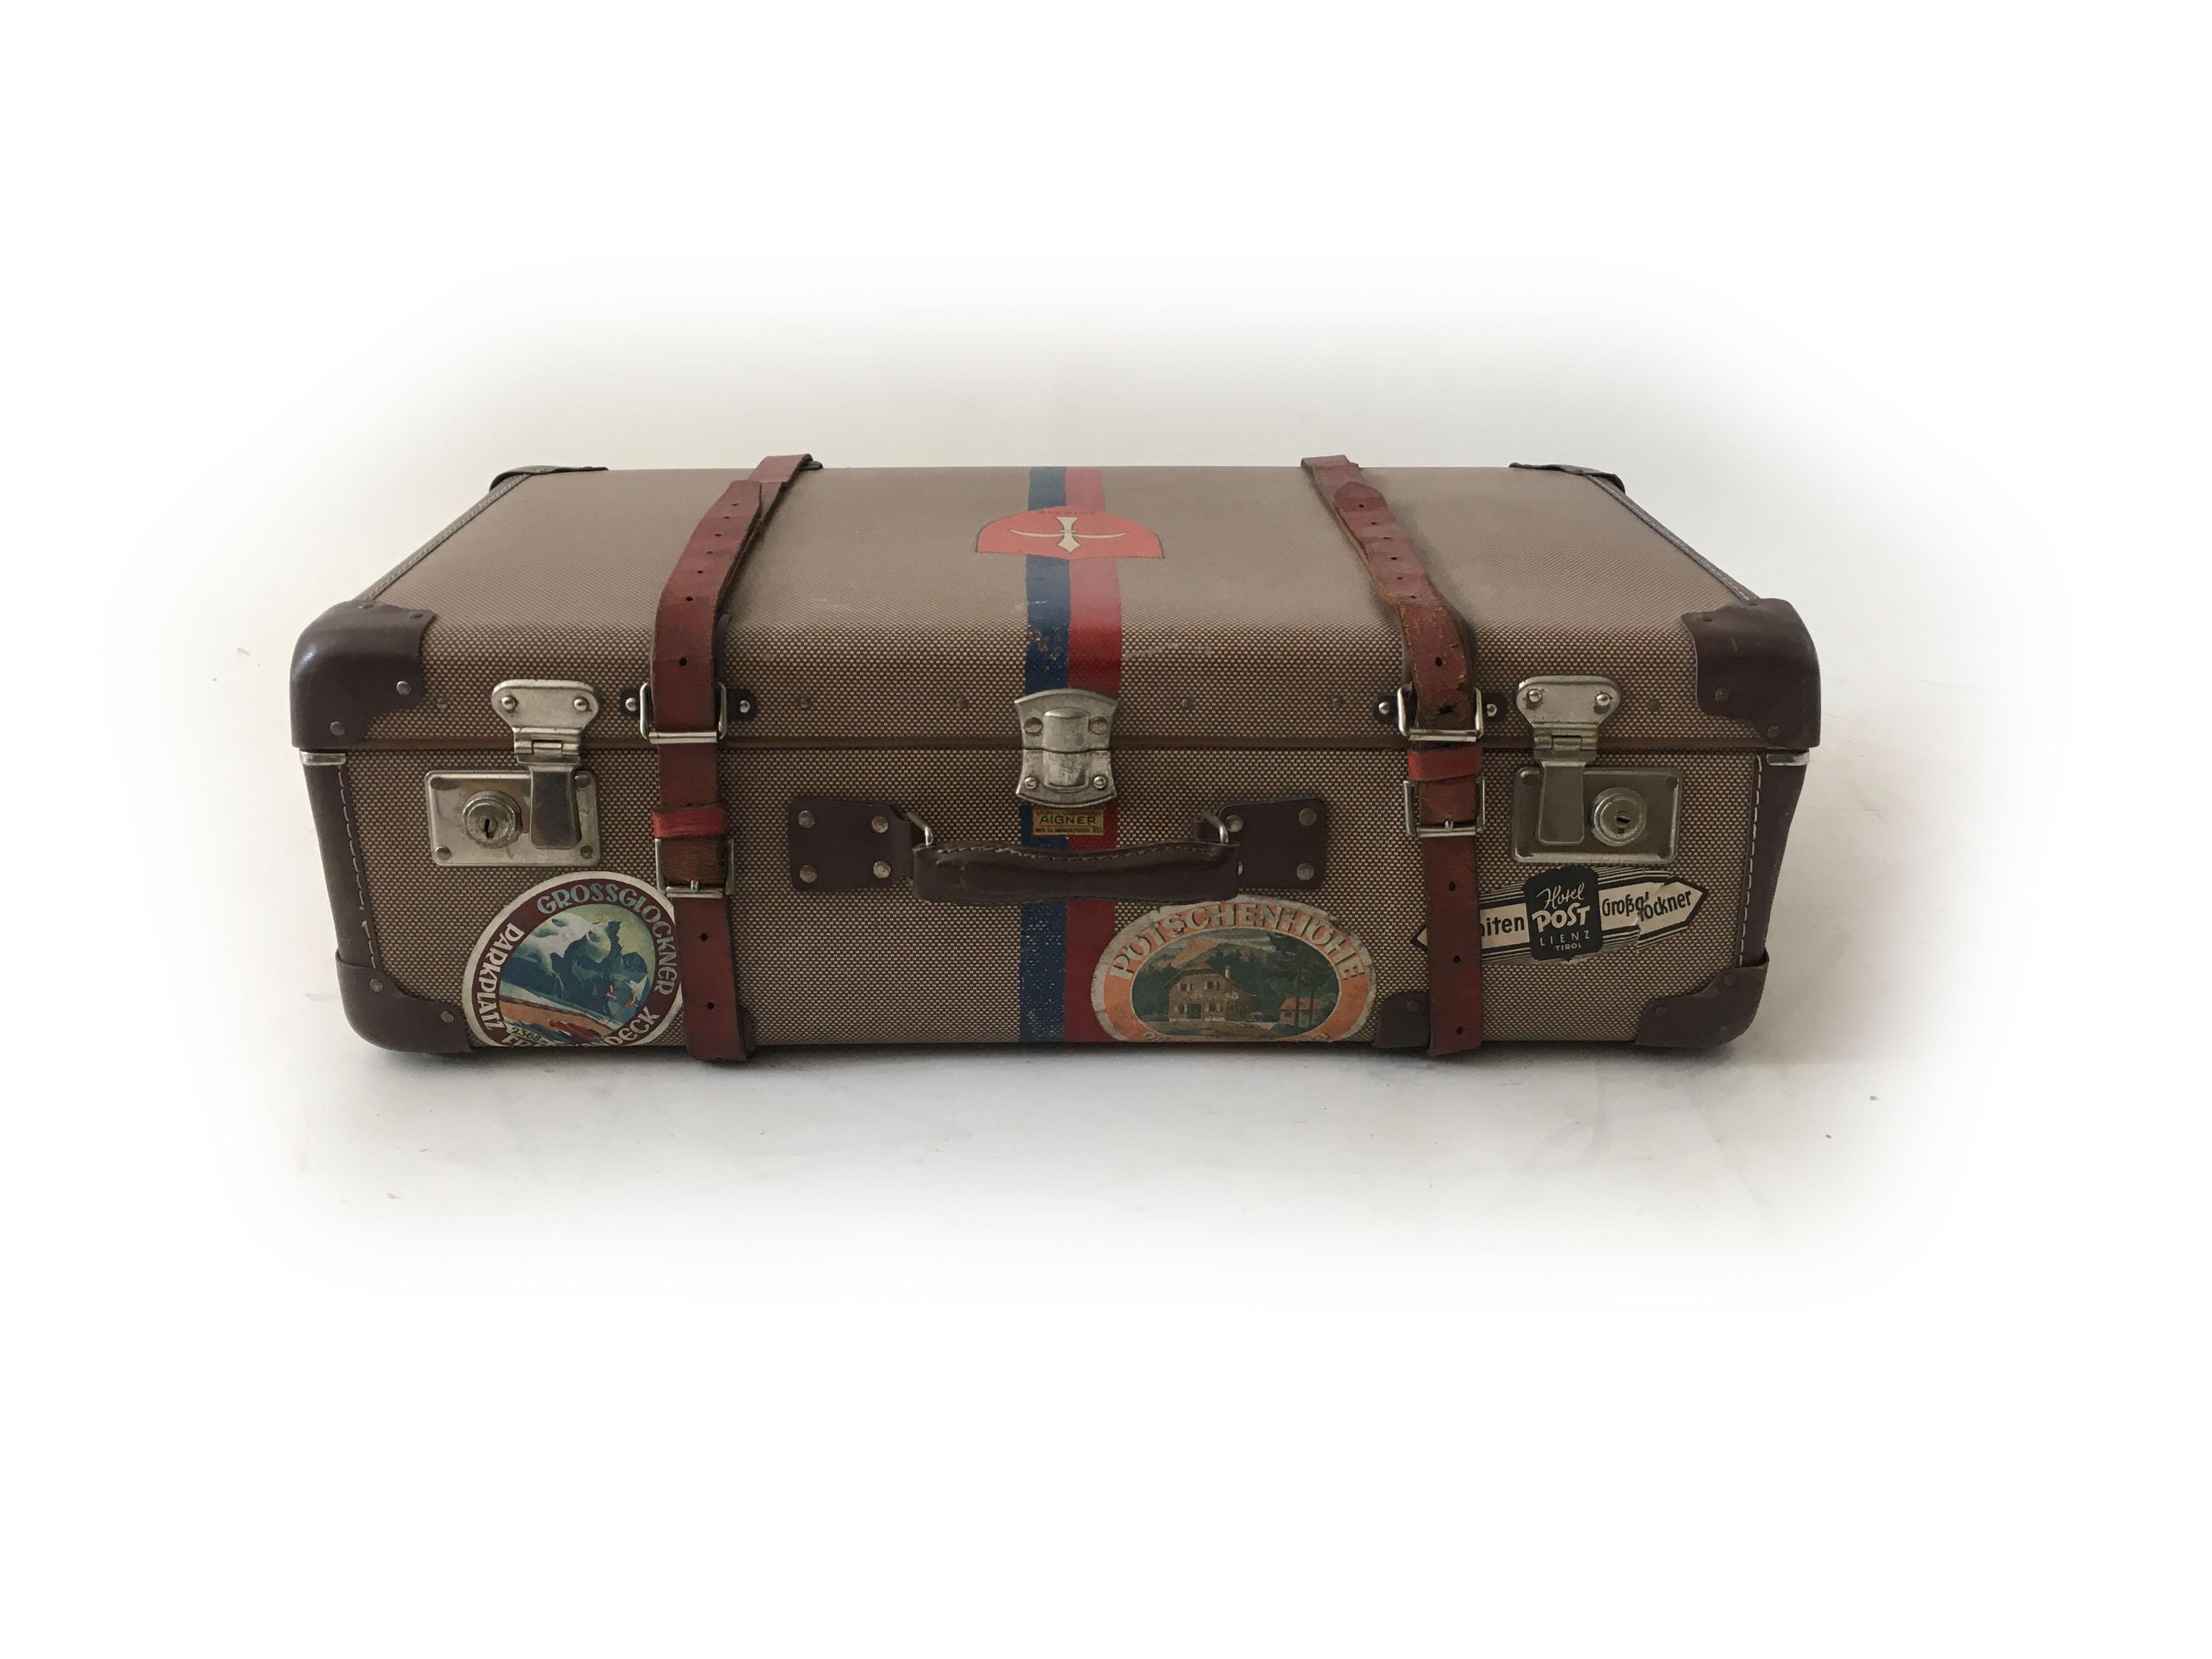 Adler Koffer luggage with painted coat of arms from the city of Trieste (Crest of Trieste) Austria 1930s. This lightweight but strong luggage has been on the adventure of the lifetime when in 1936 the Grossglockner High Alpine Road was first opened